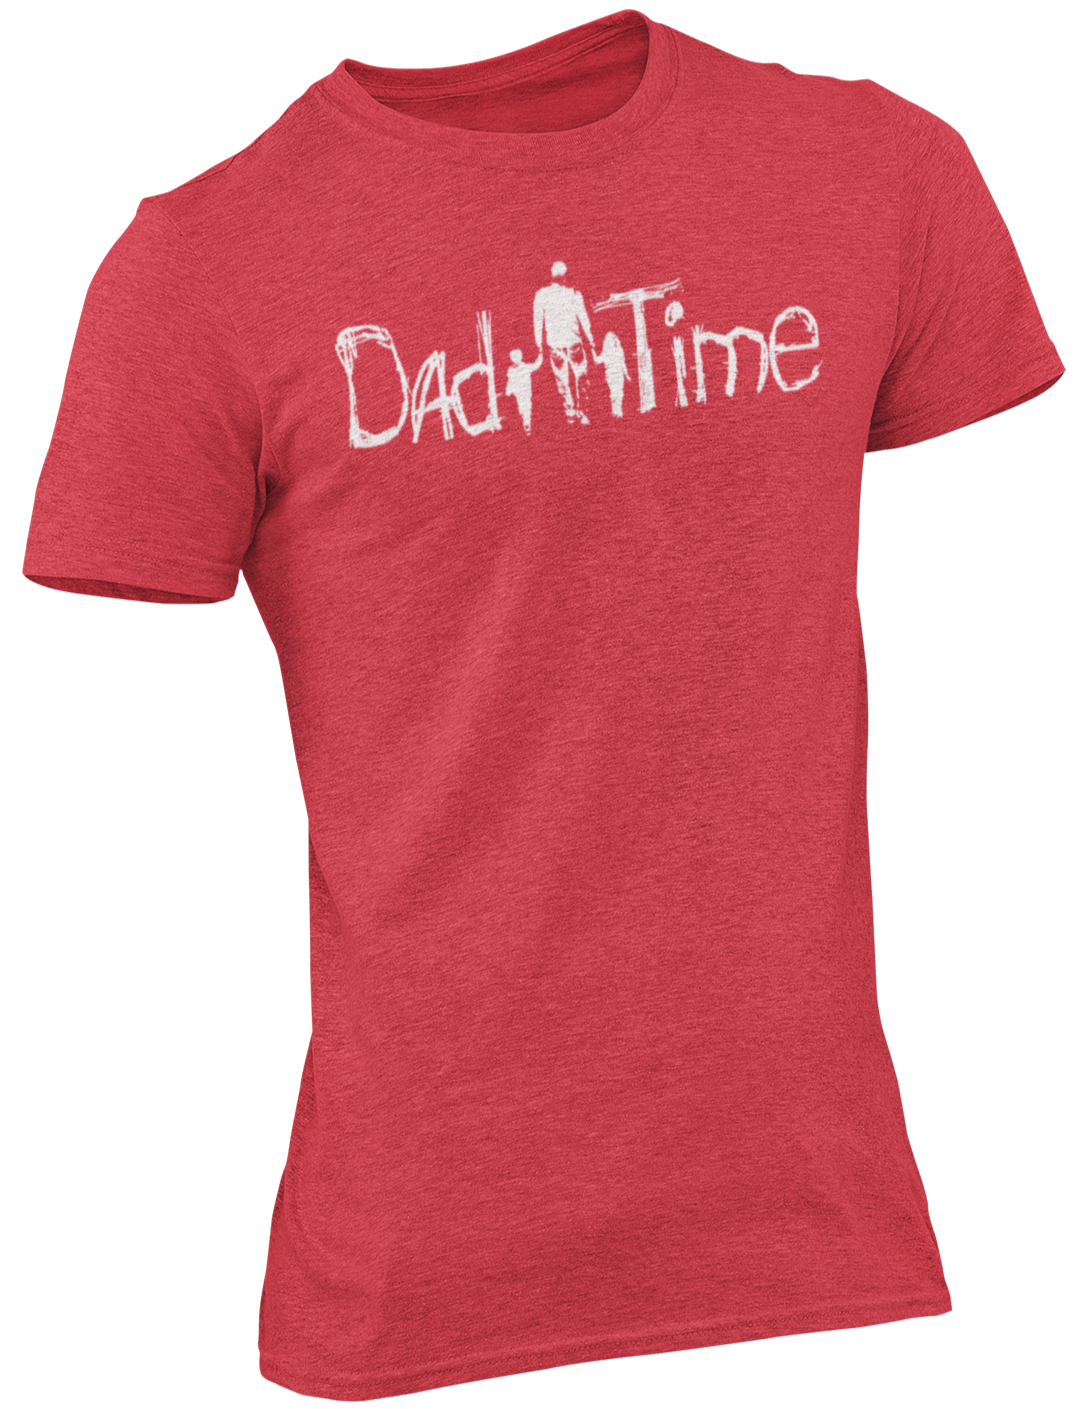 Dad Time Tee - One Boy & One Girl - DT100